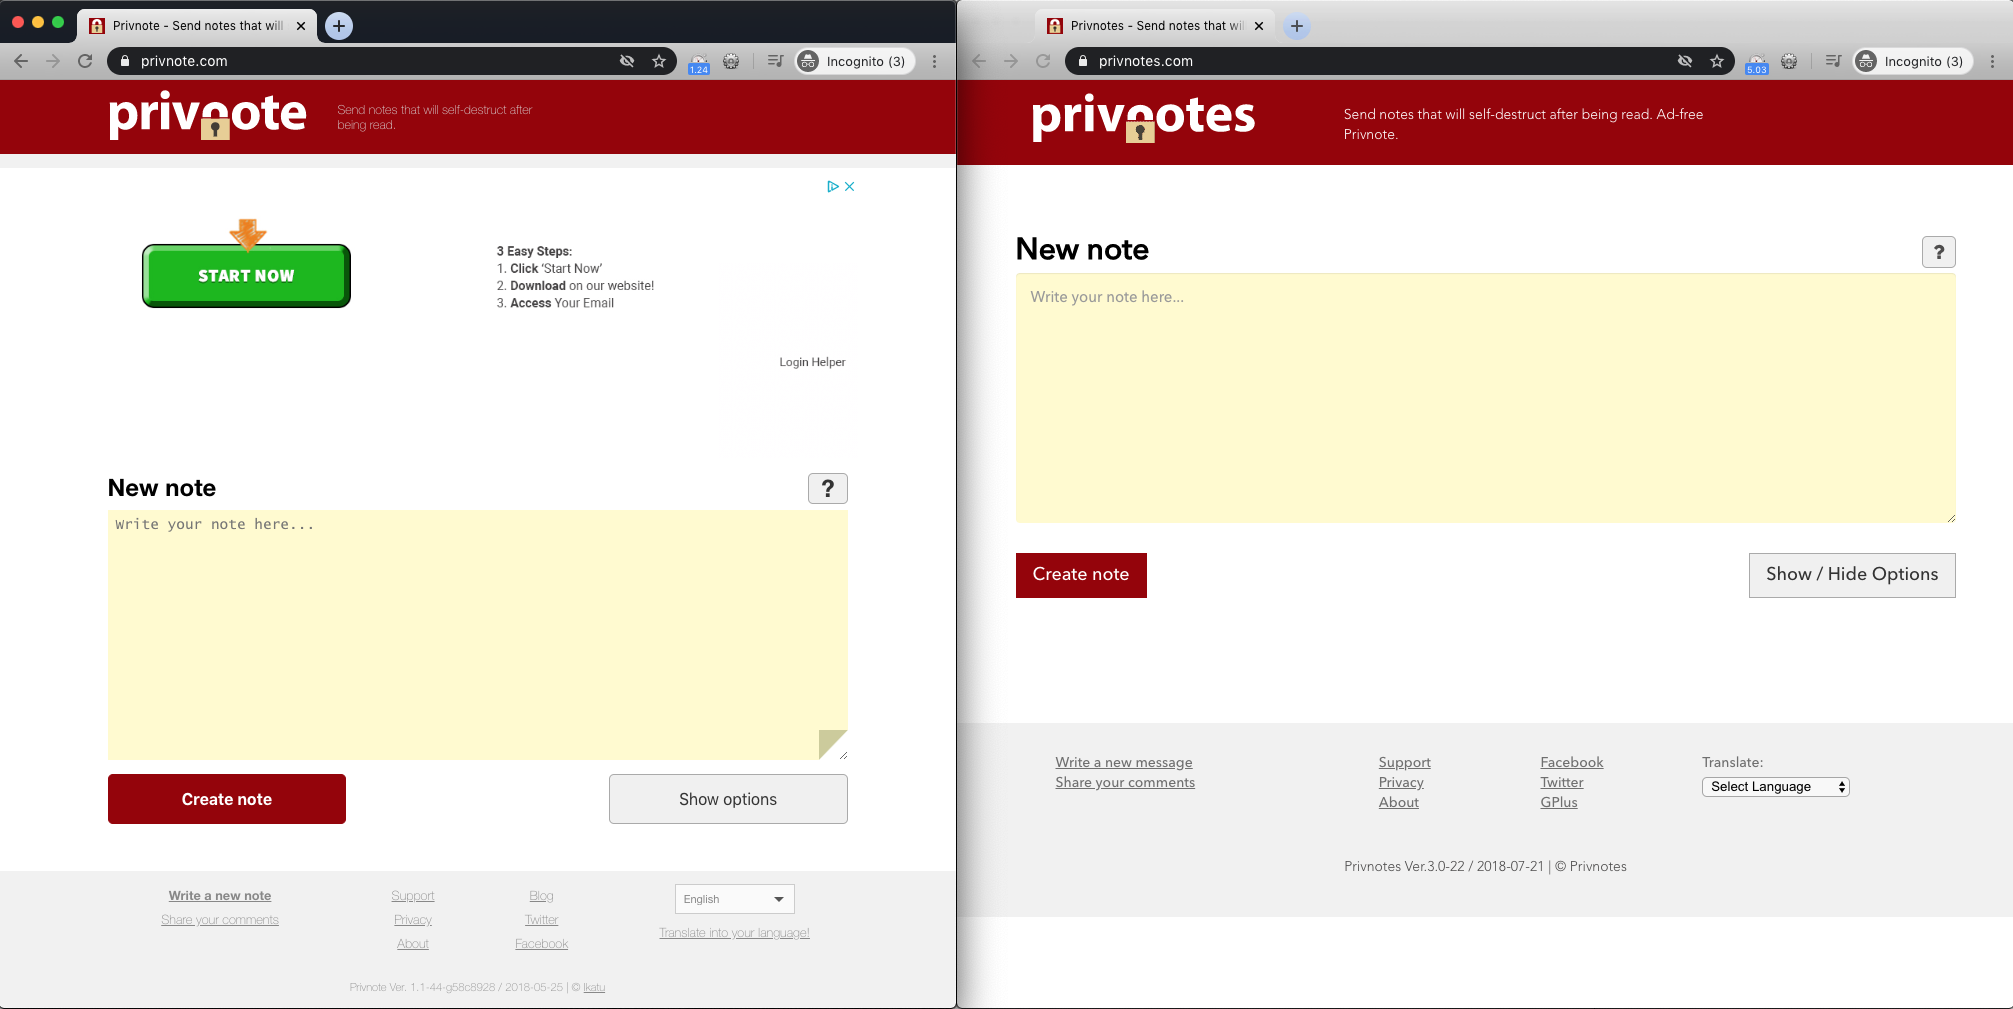 Can one deliver attachments by using a information on privnote.com?